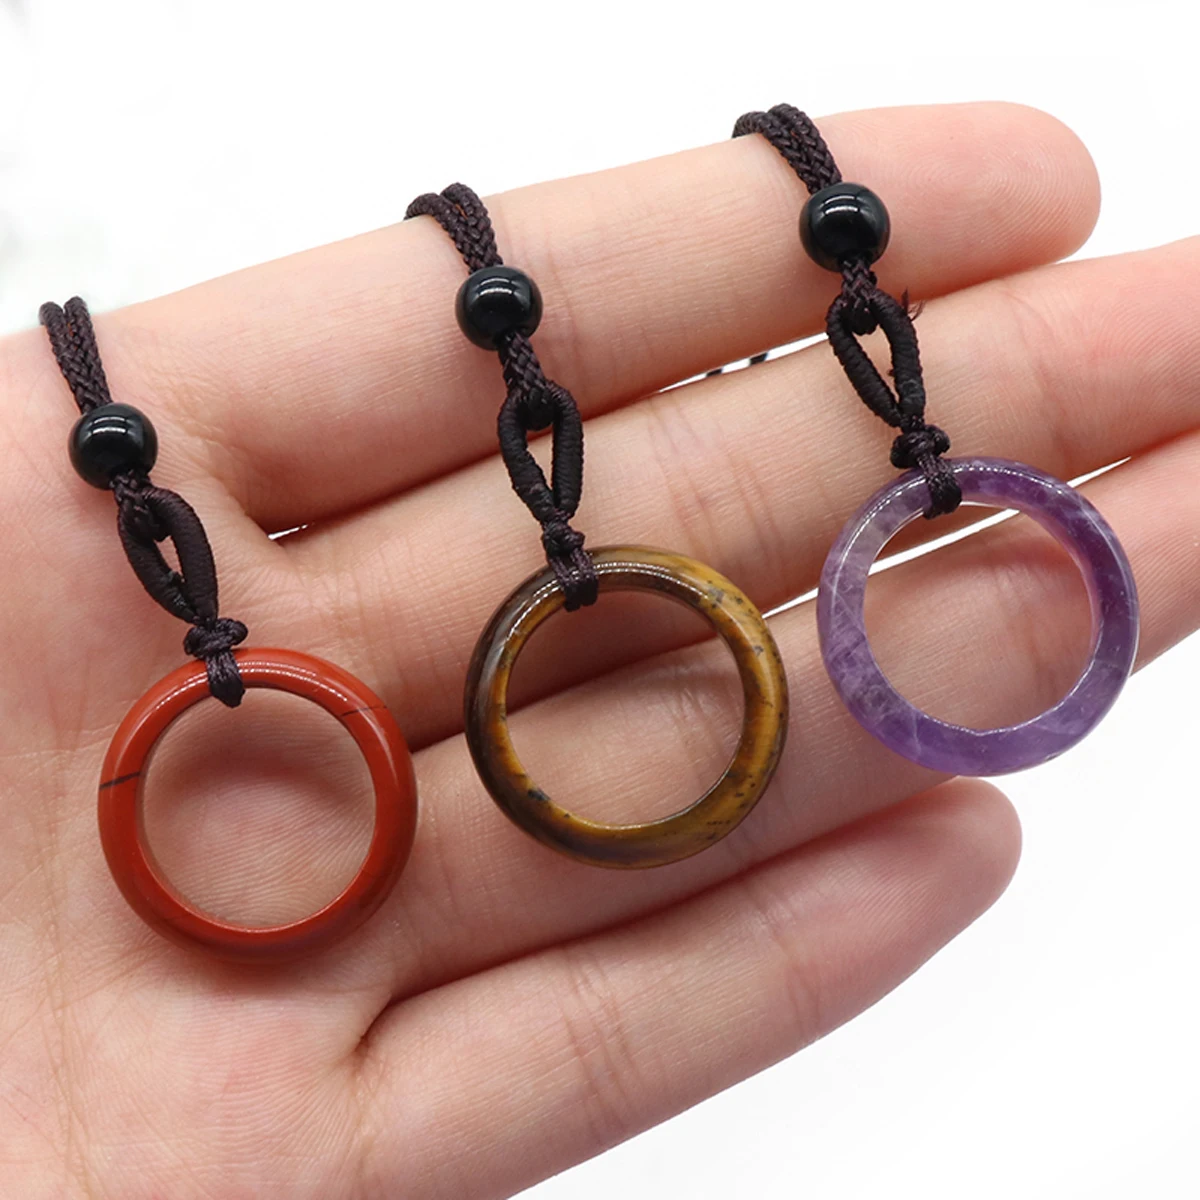 

1/2pc Natural Stone Pendant Crystals Quartz Agate Tiger Eye Stone Round Charms Long Rope Chains Pendant Necklaces For Women